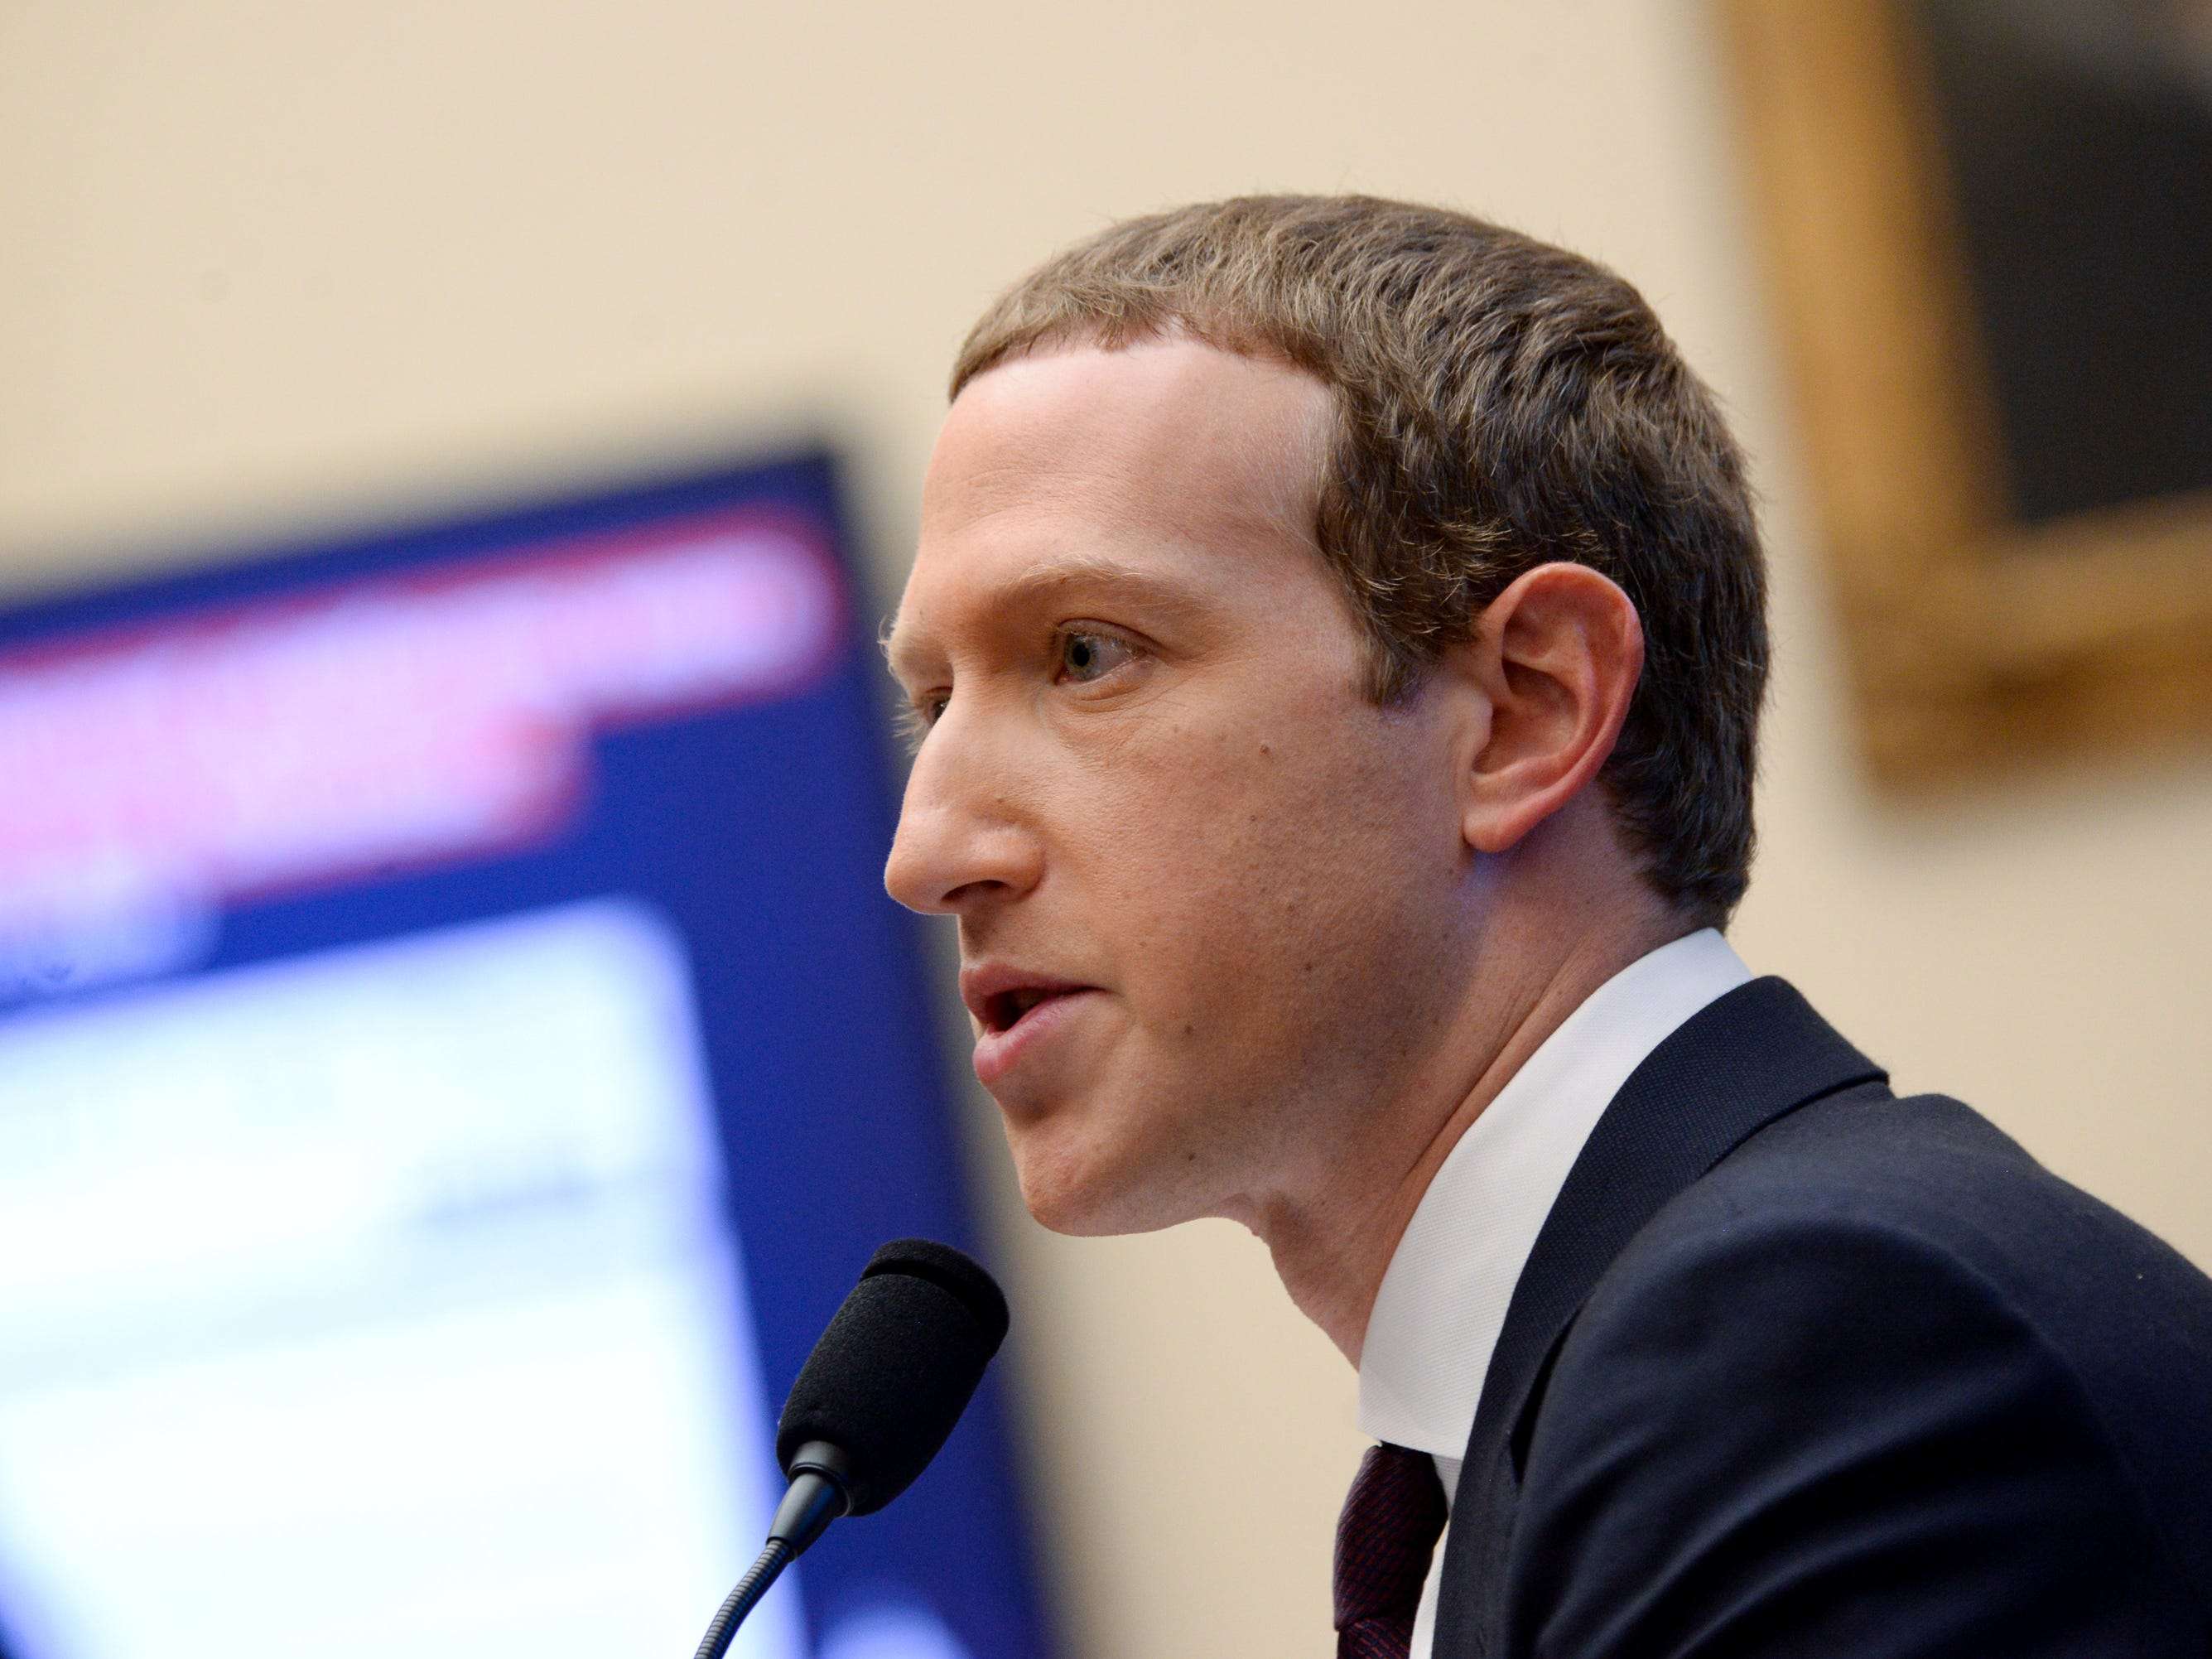 Mark Zuckerberg warns that relaxing shelter-in-place rules too soon will cause the pandemic to worsen, saying it will 'guarantee' future outbreaks